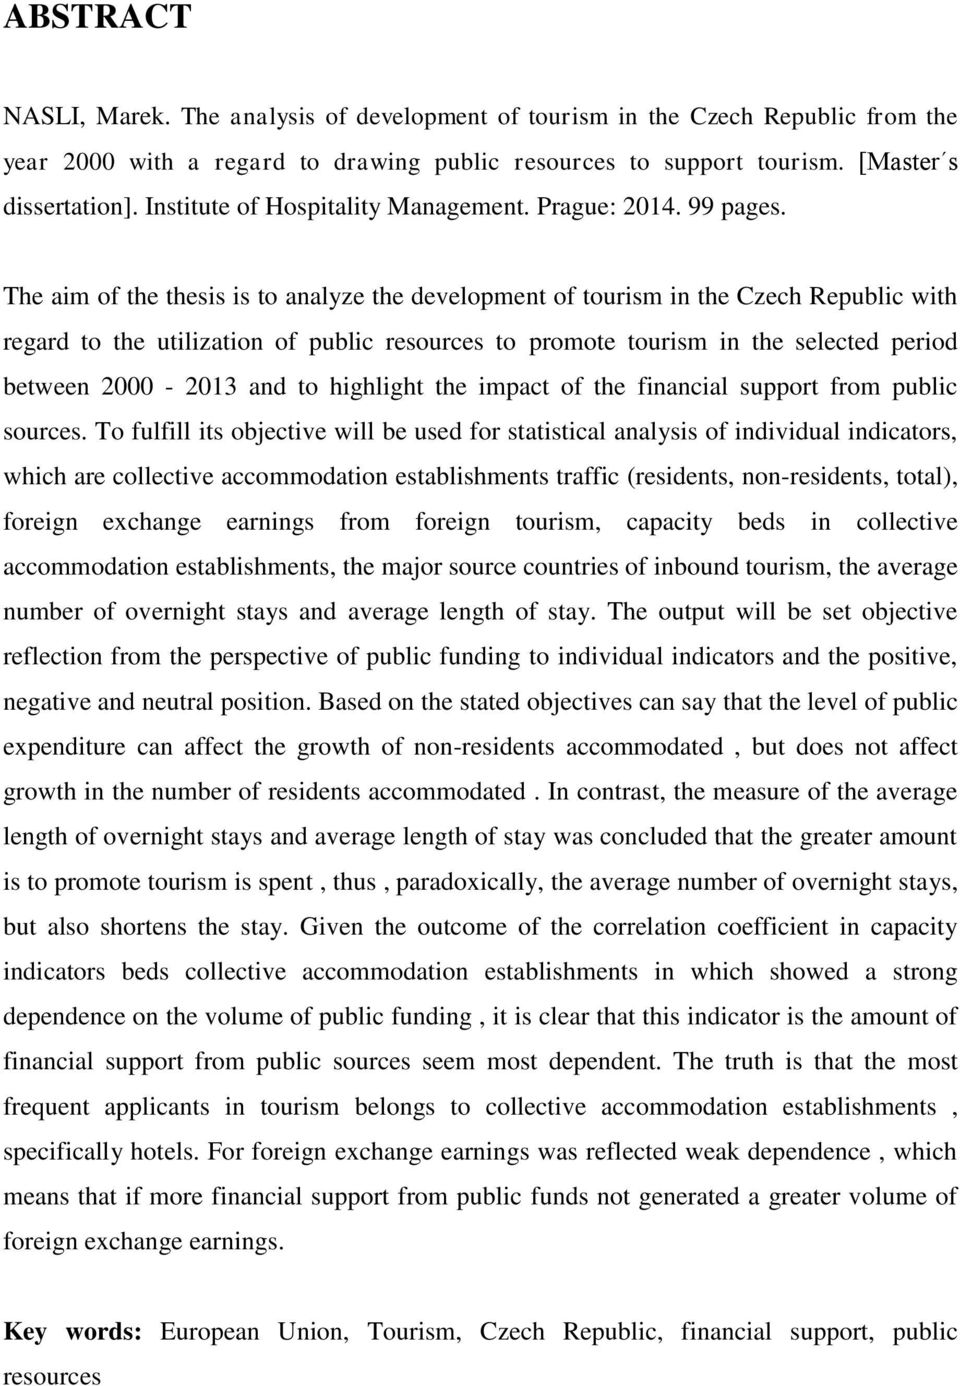 The aim of the thesis is to analyze the development of tourism in the Czech Republic with regard to the utilization of public resources to promote tourism in the selected period between 2000-2013 and